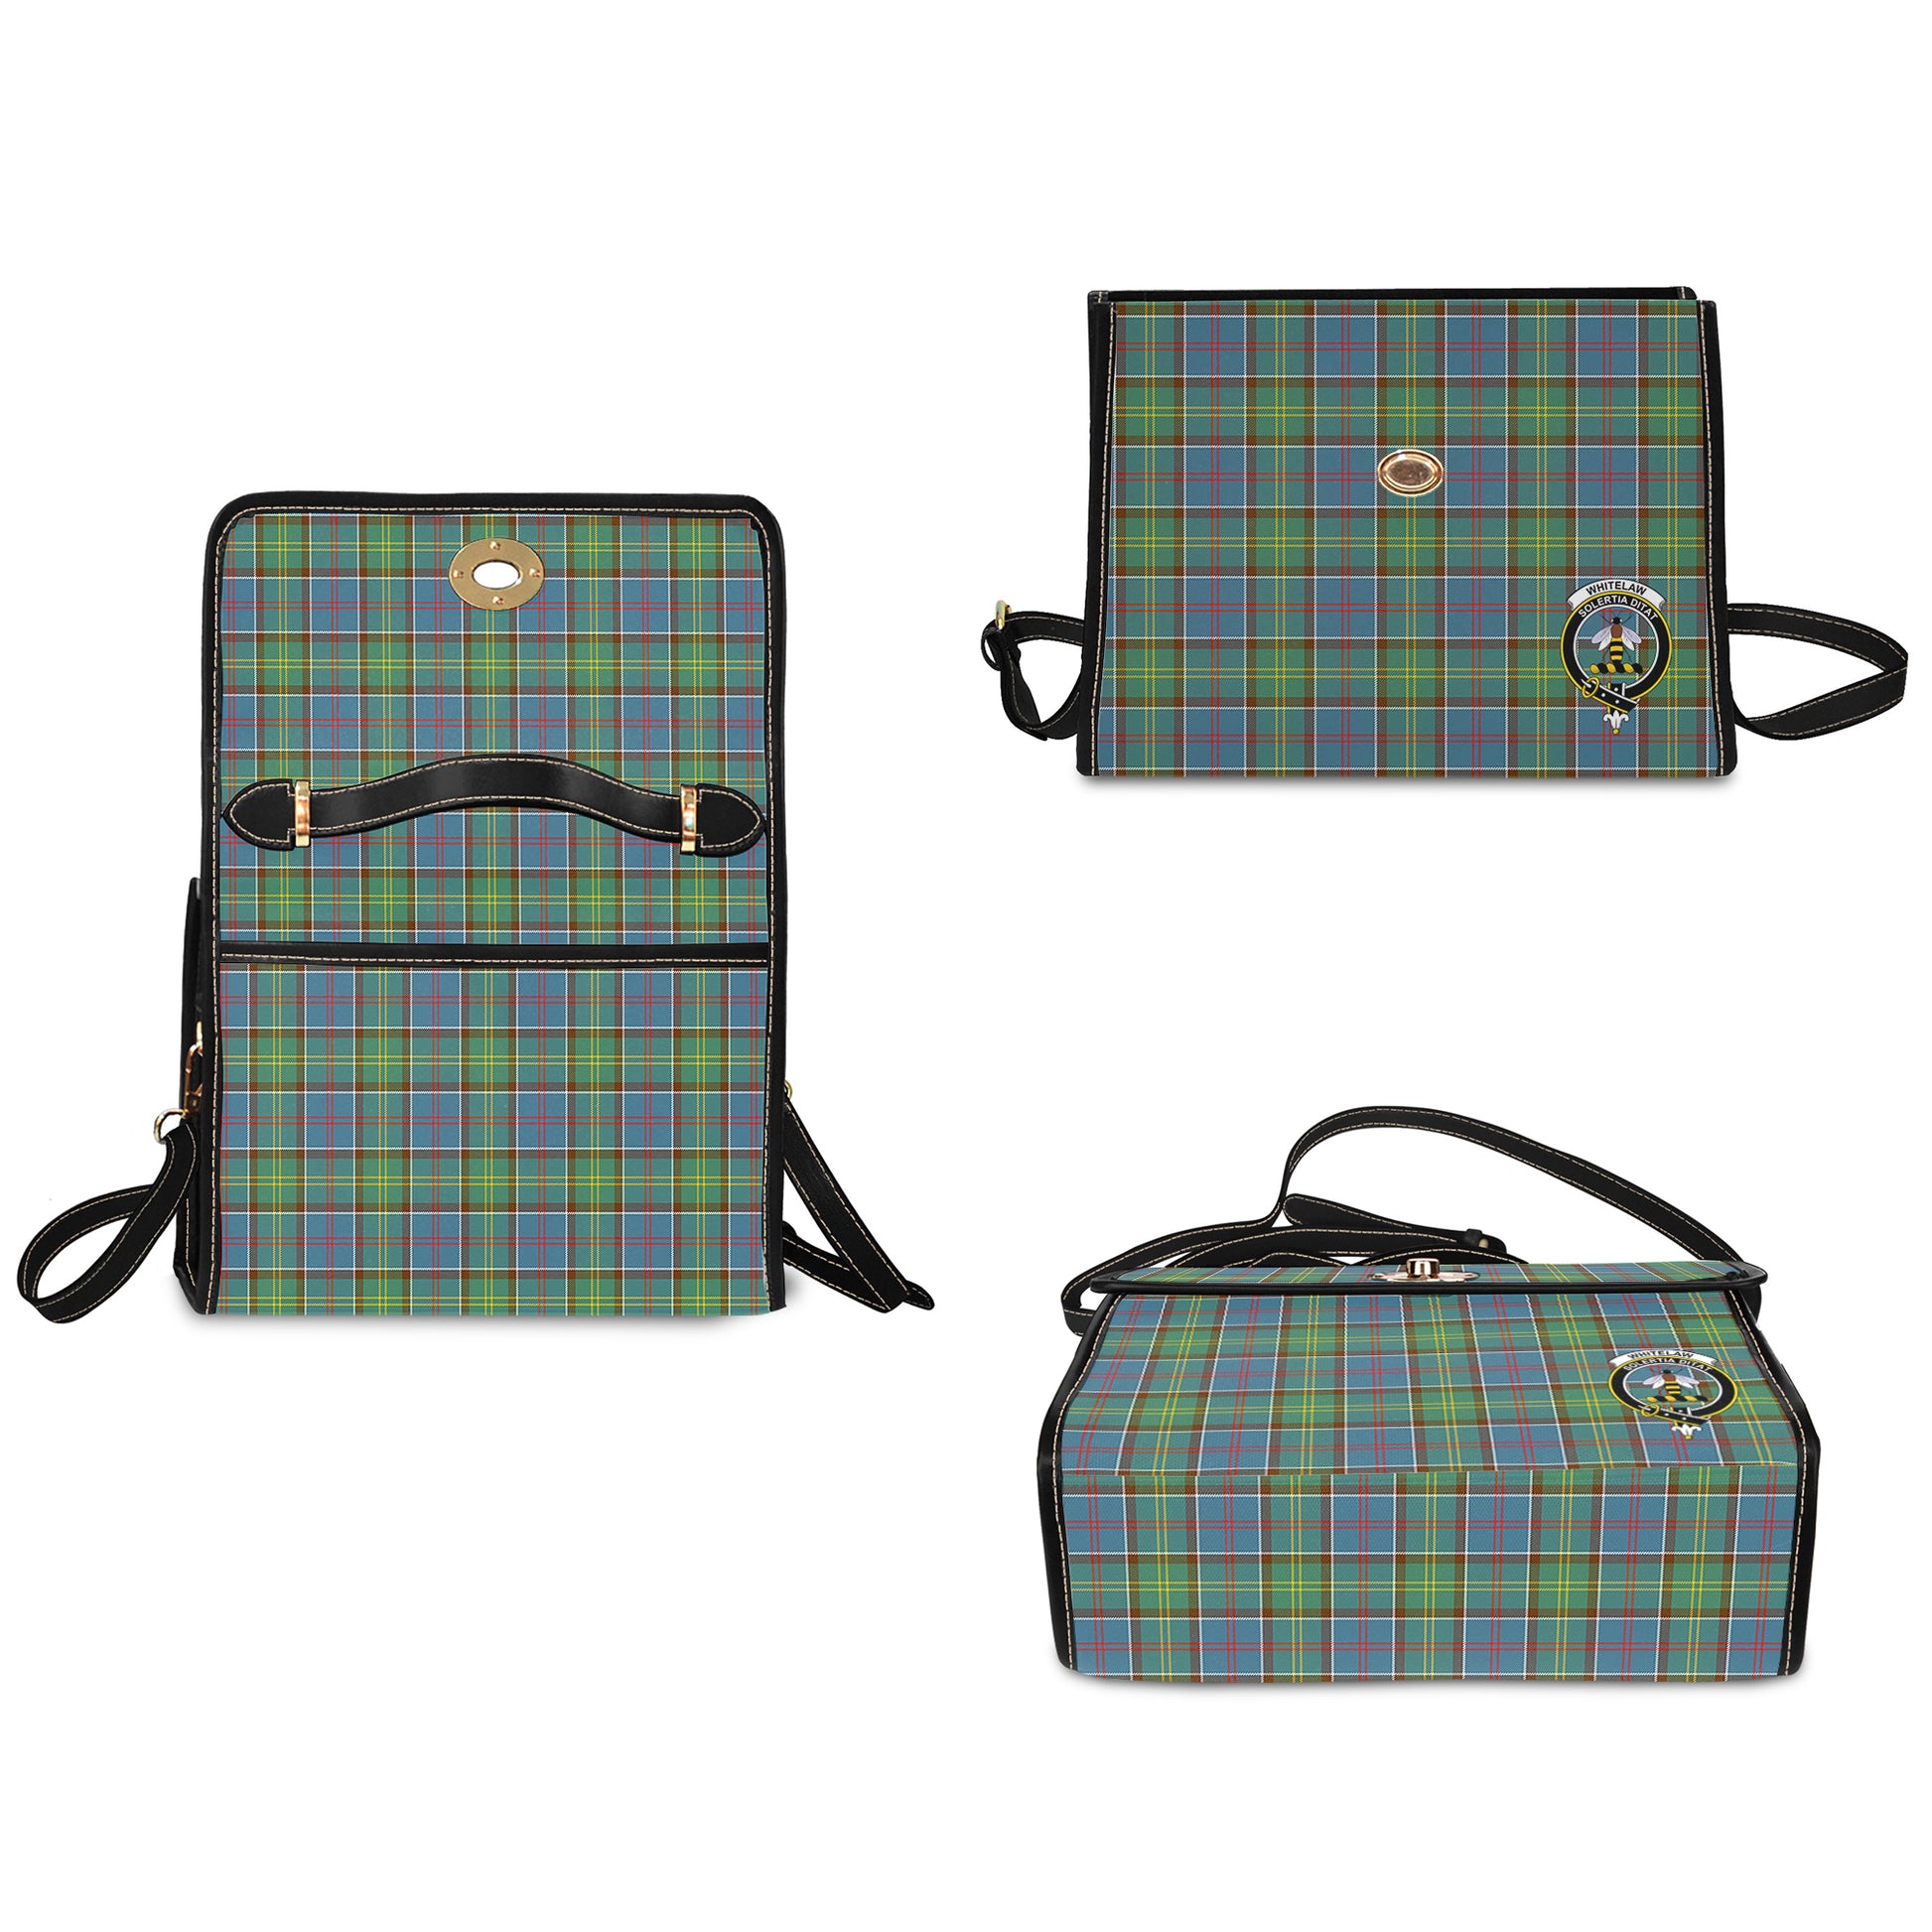 whitelaw-tartan-leather-strap-waterproof-canvas-bag-with-family-crest